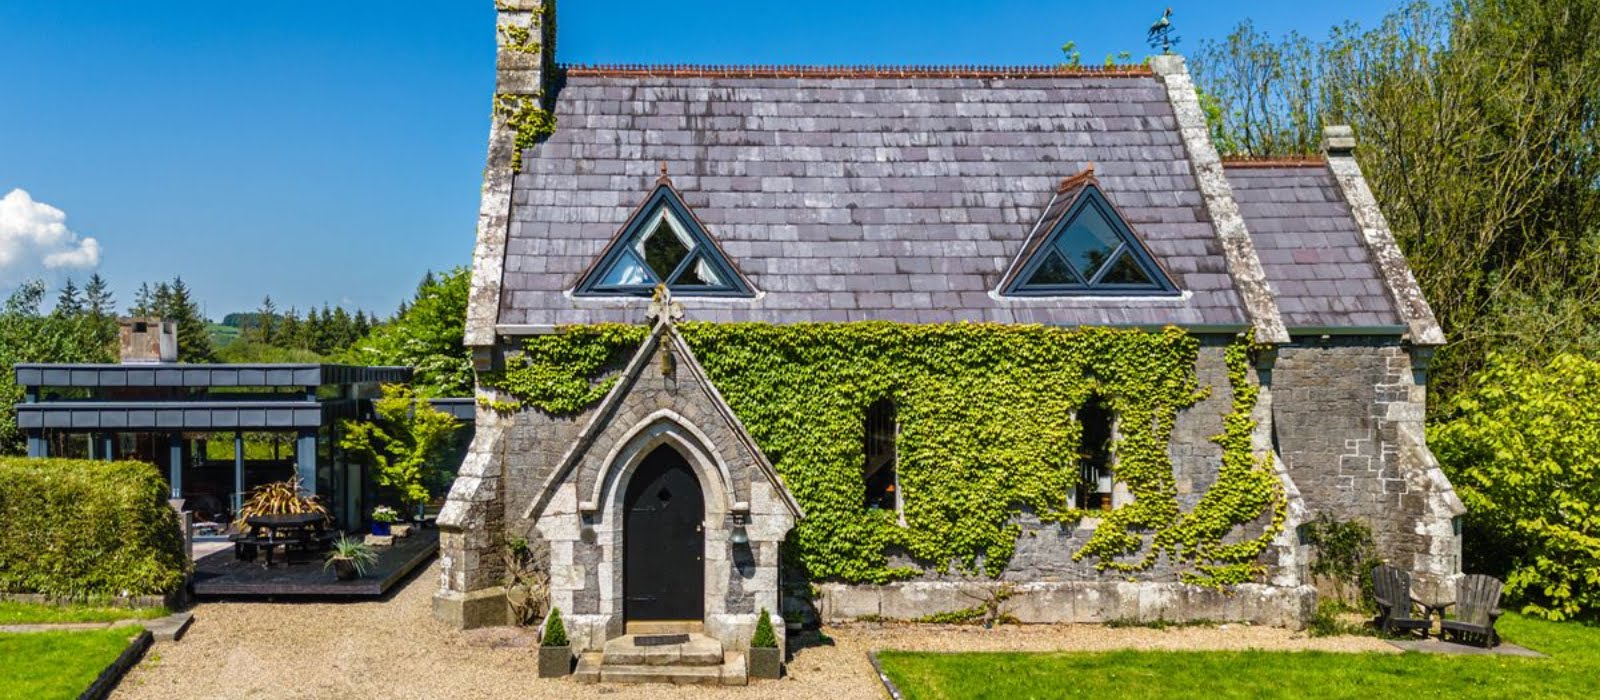 Inside the former church-turned-family home on the market for €875,000